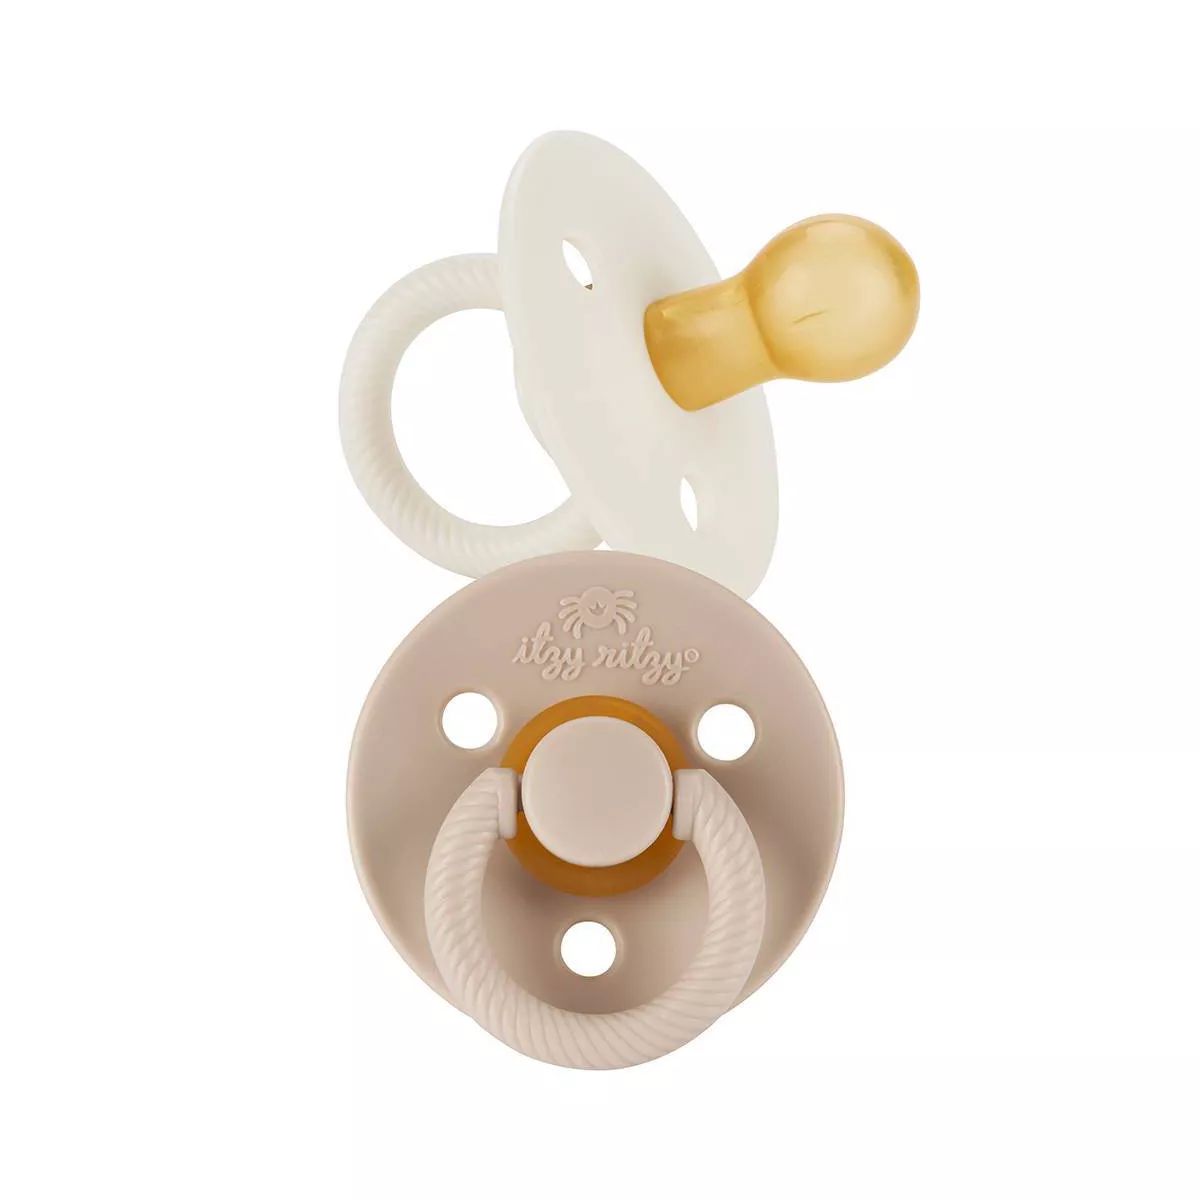 Itzy Ritzy Natural Soother - Natural Rubber Nipple 2pk | Target